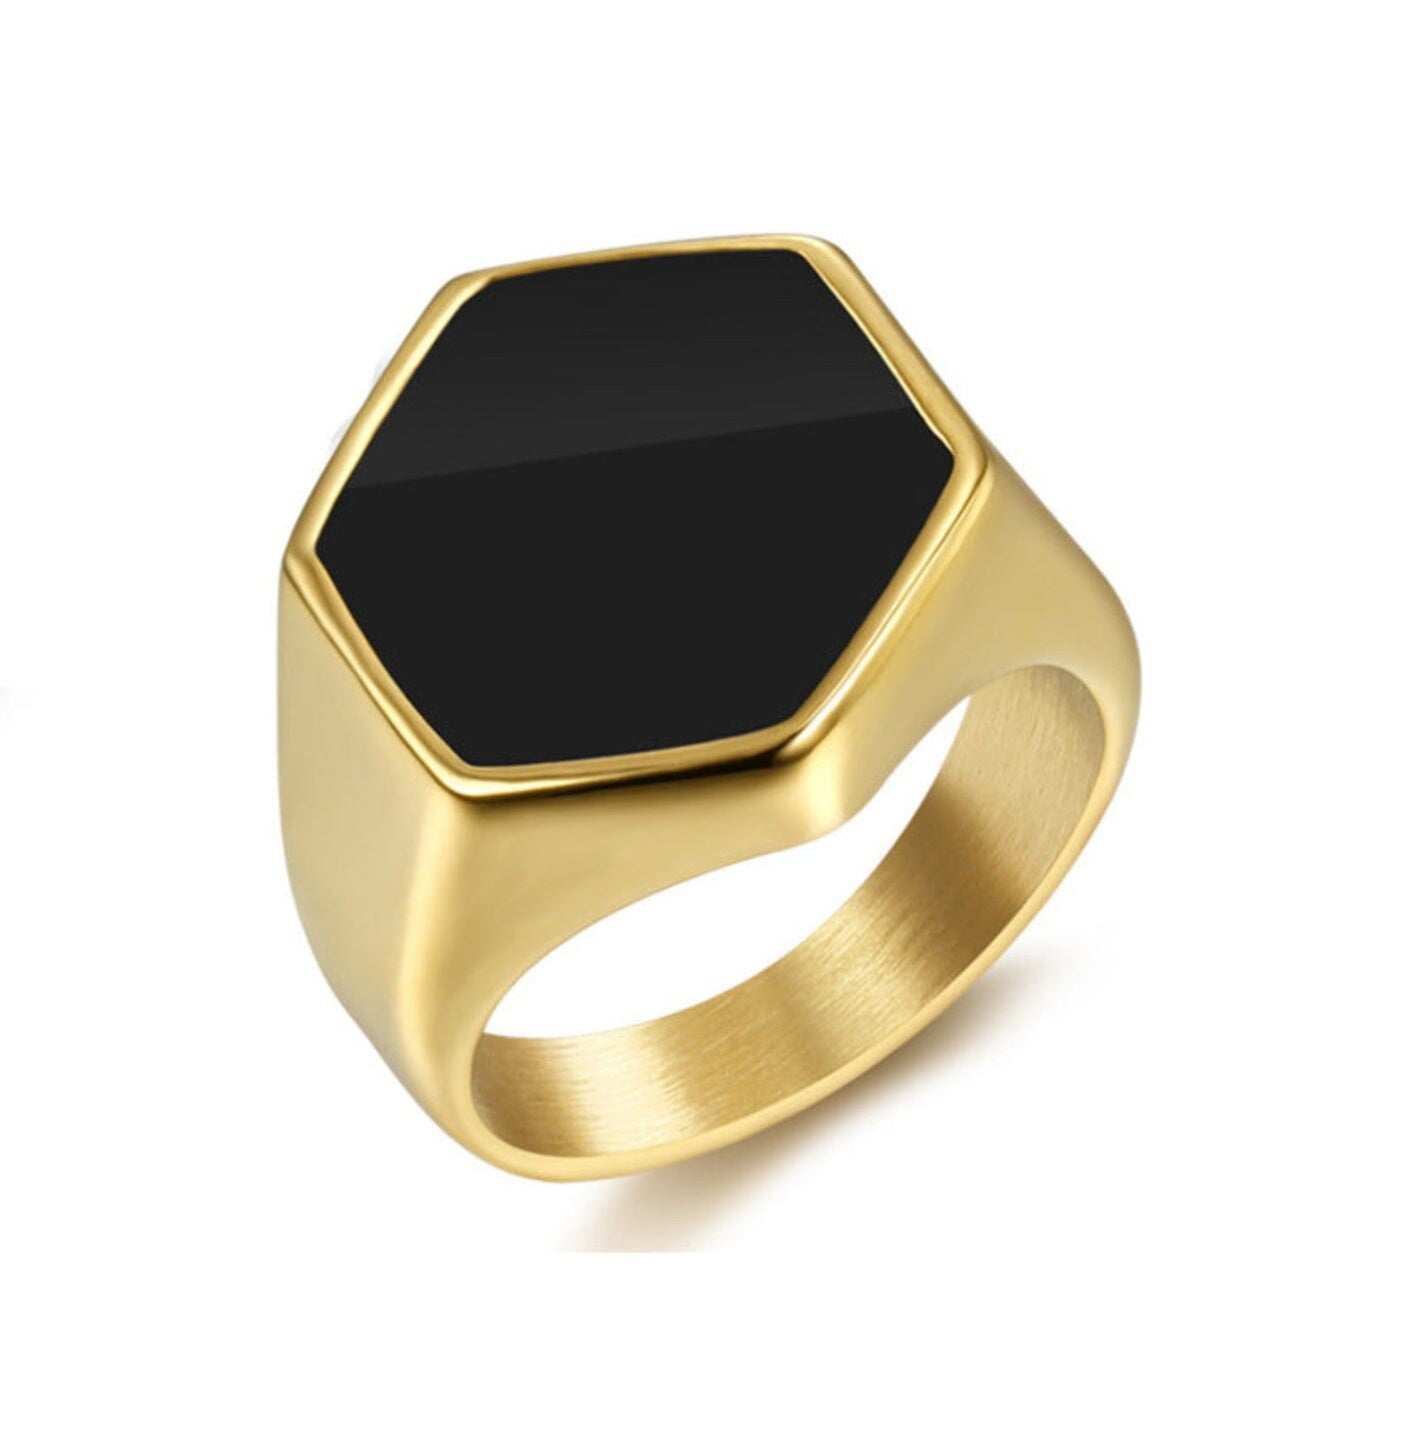 ONYX RING ring Yubama Jewelry Online Store - The Elegant Designs of Gold and Silver ! Gold 10 